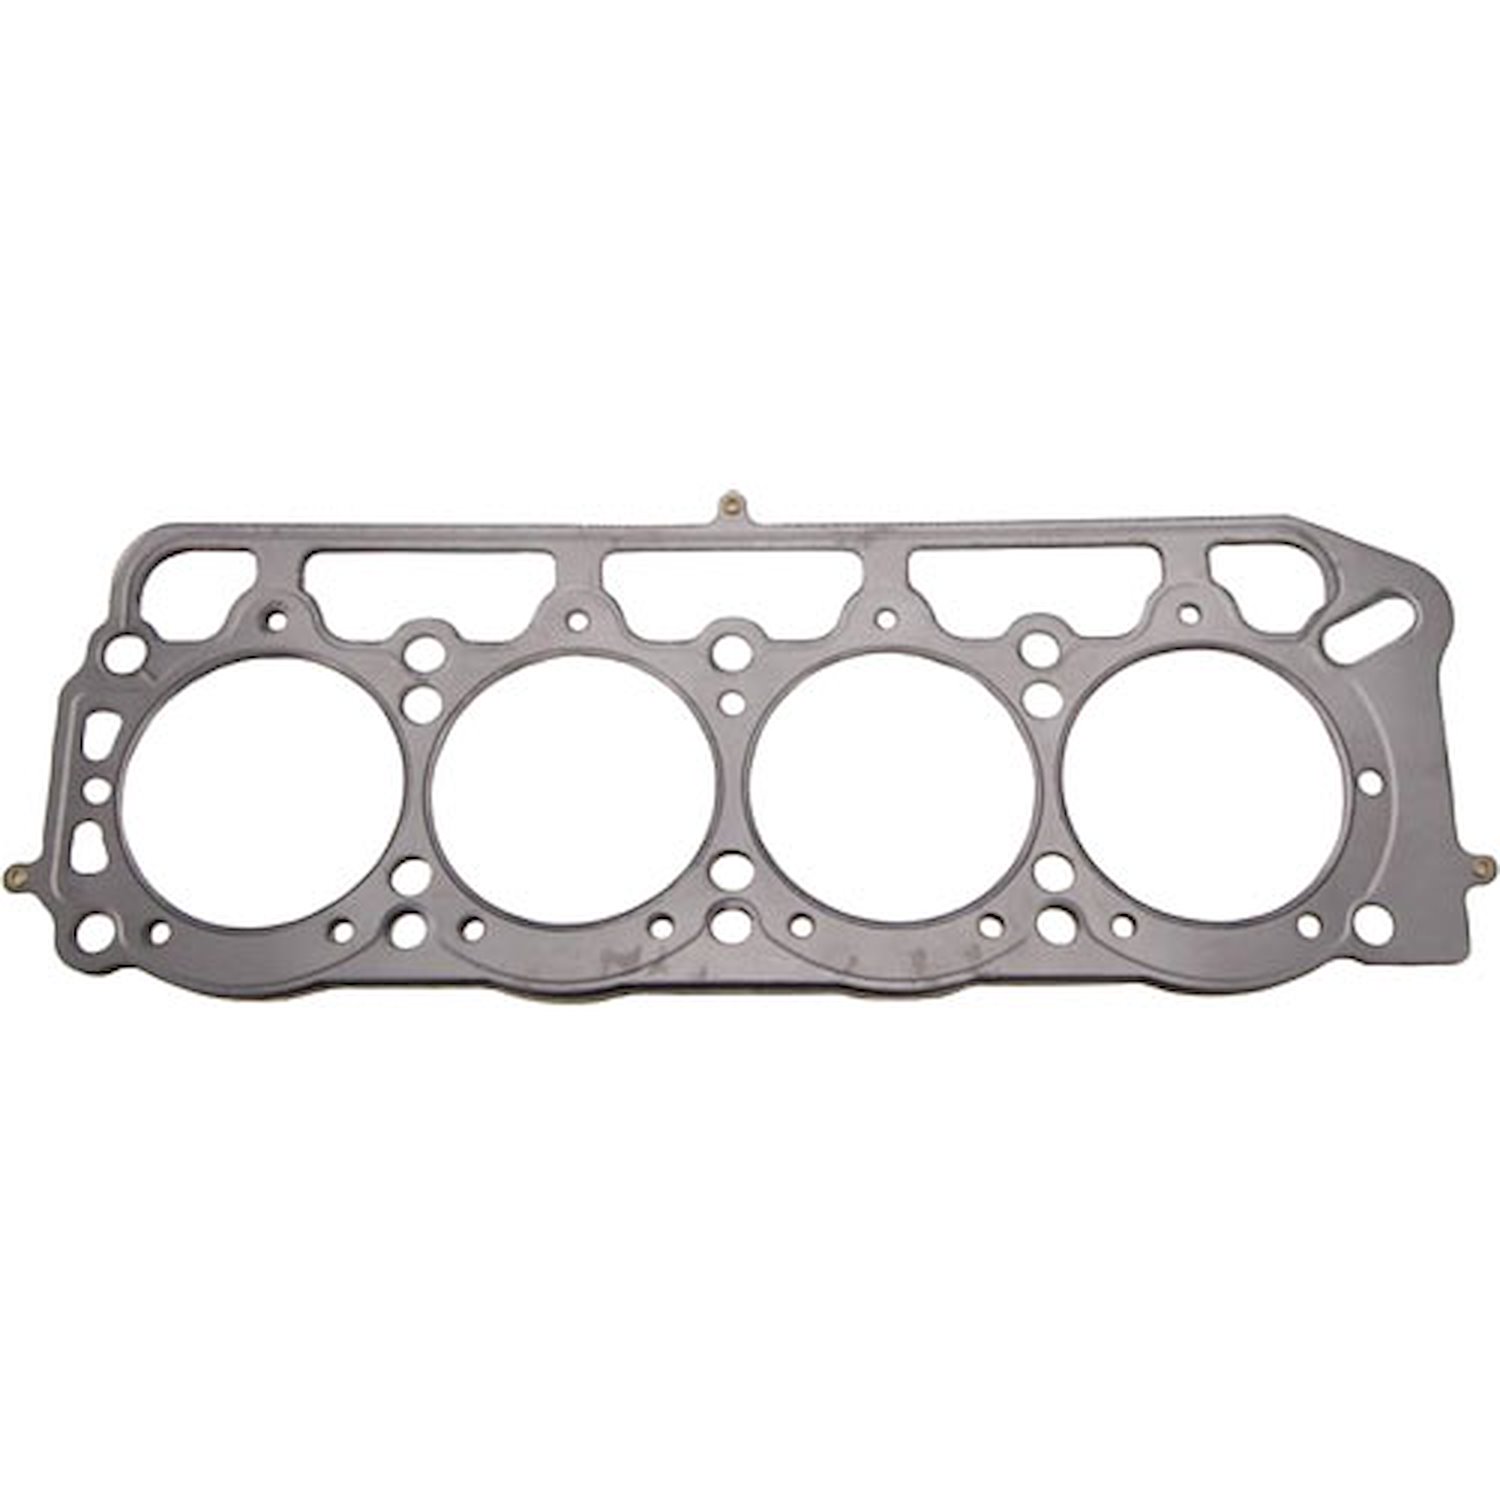 Head Gasket for Select 1971-1982 Toyota Carina/Corolla with 2T, 2T-C, 3T-C, 3T-EU, 13T-U Engines [0.120 in.]